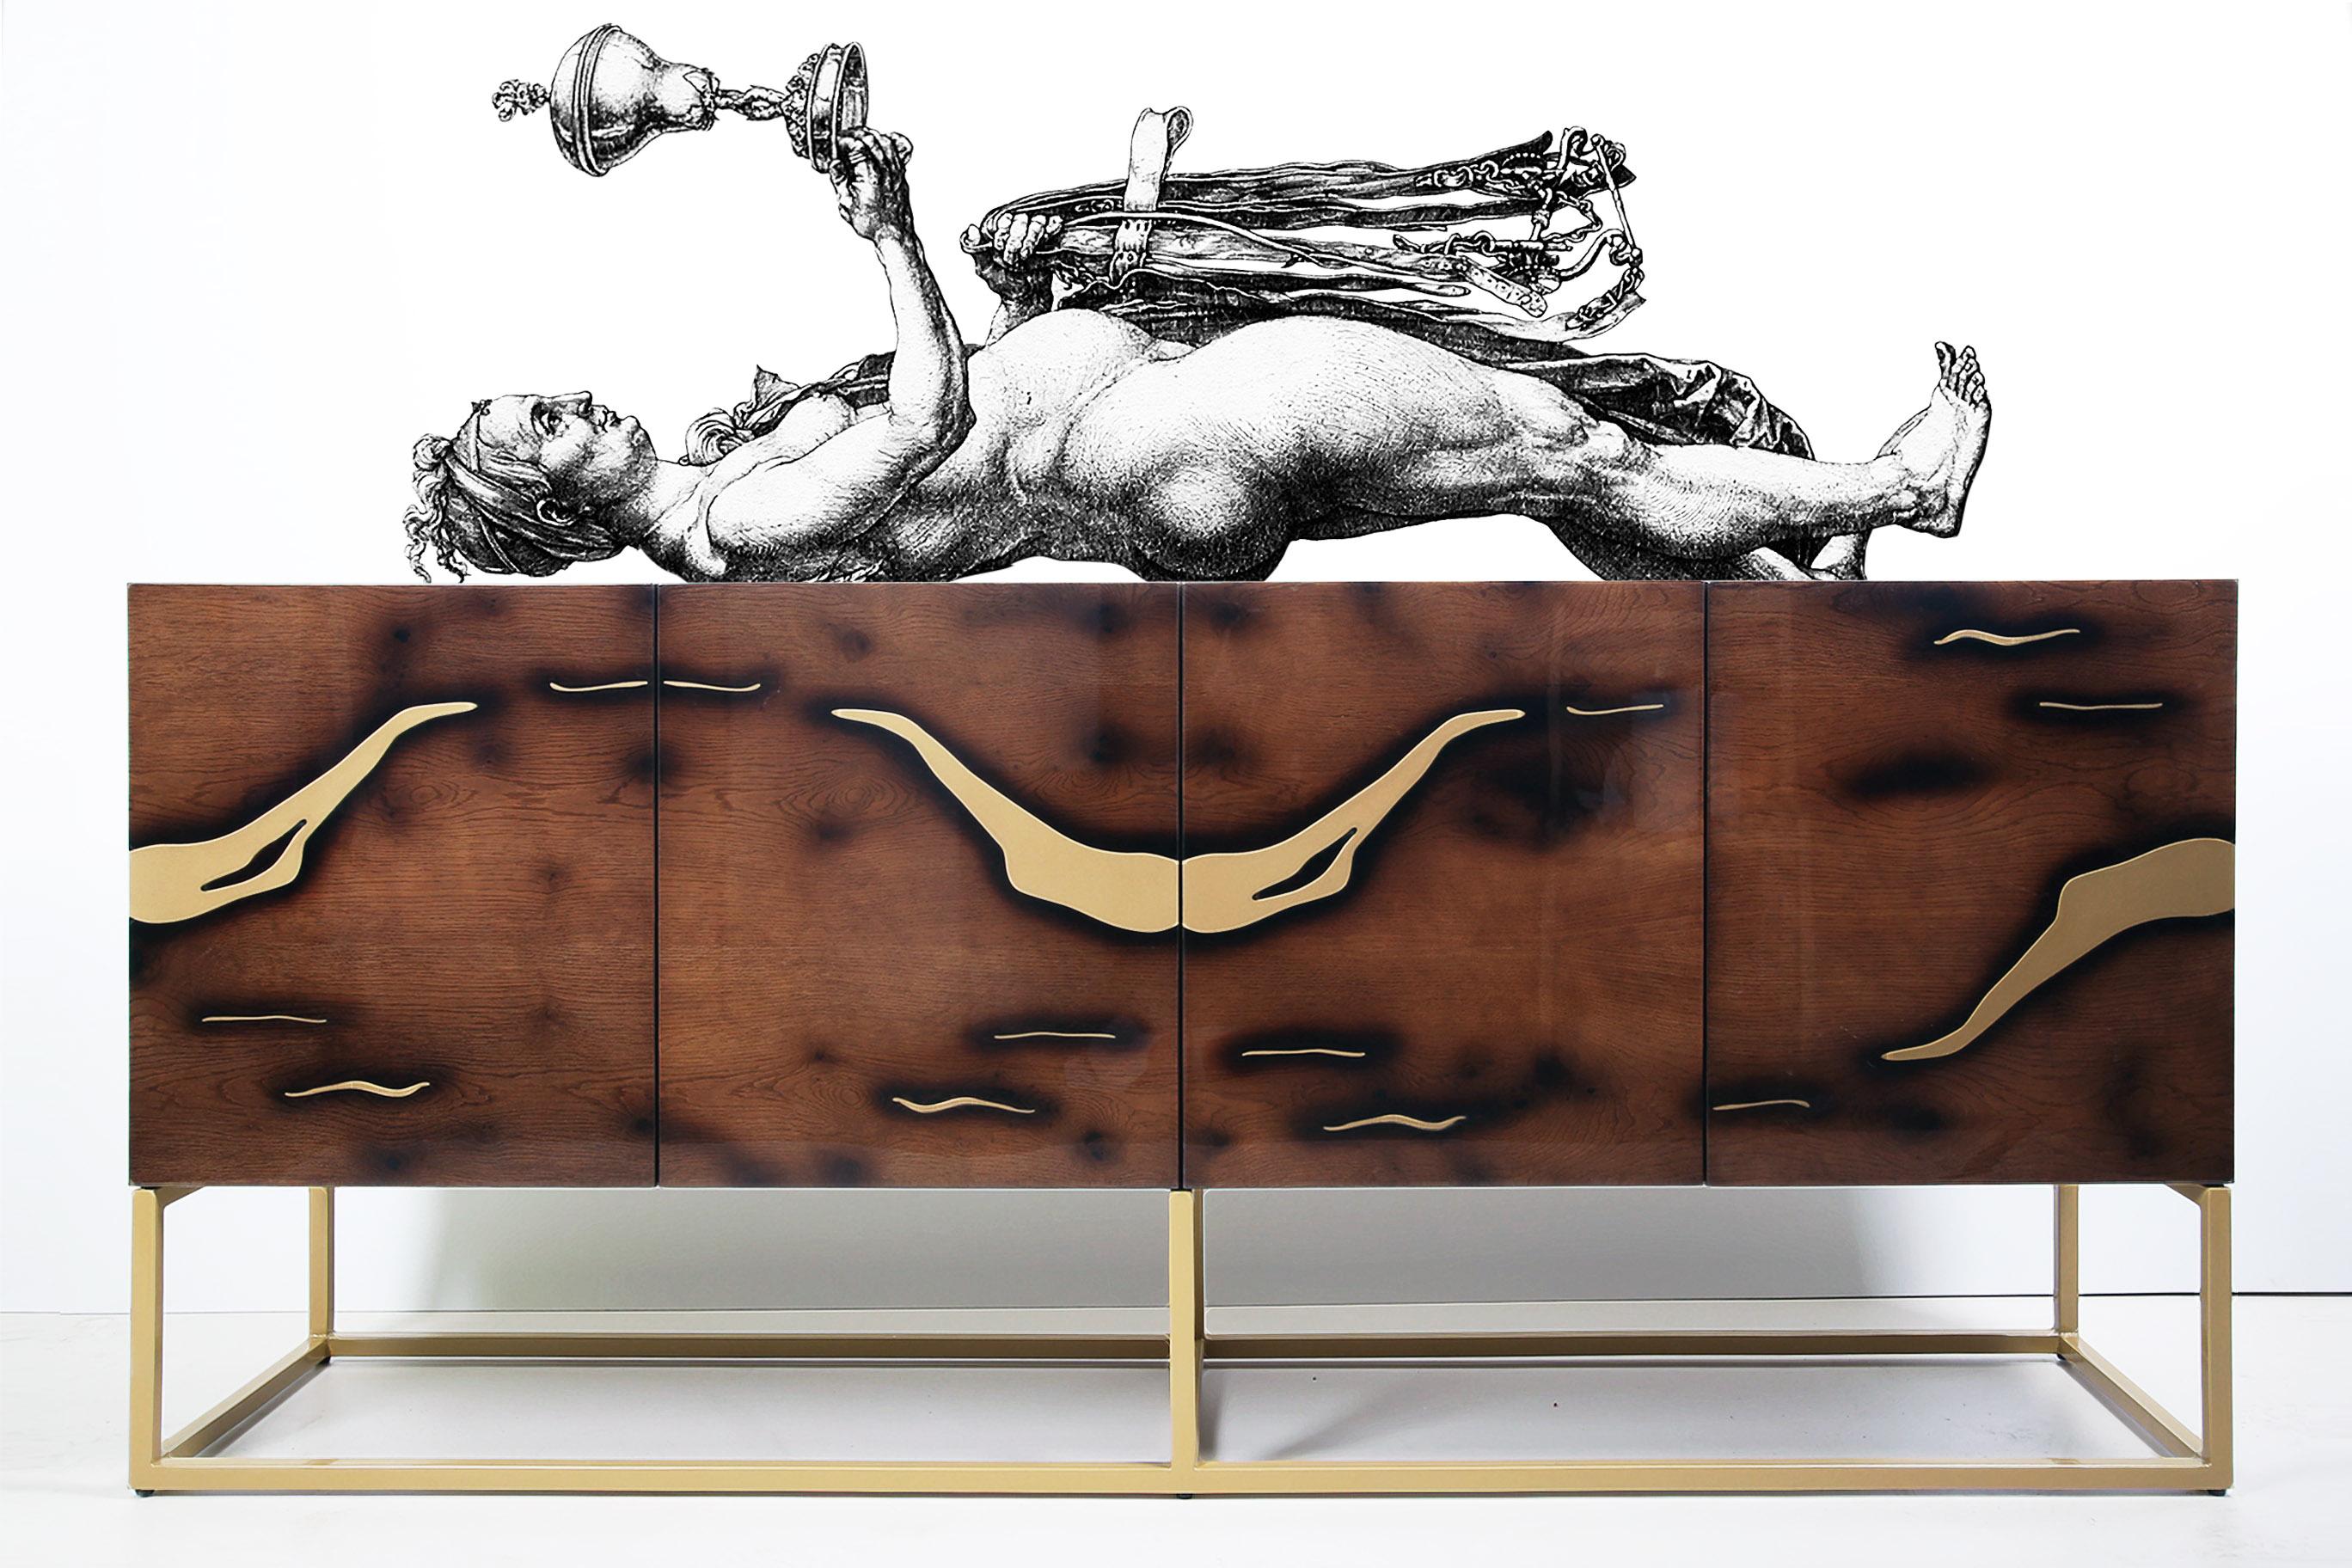 New Sideboard from Oxara collection! Title is after Icelandic river!

If you are looking for one-of-a-kind unique furniture, then you have definitely come to the right place here at Railis Design. Here, you will be able to peruse the many